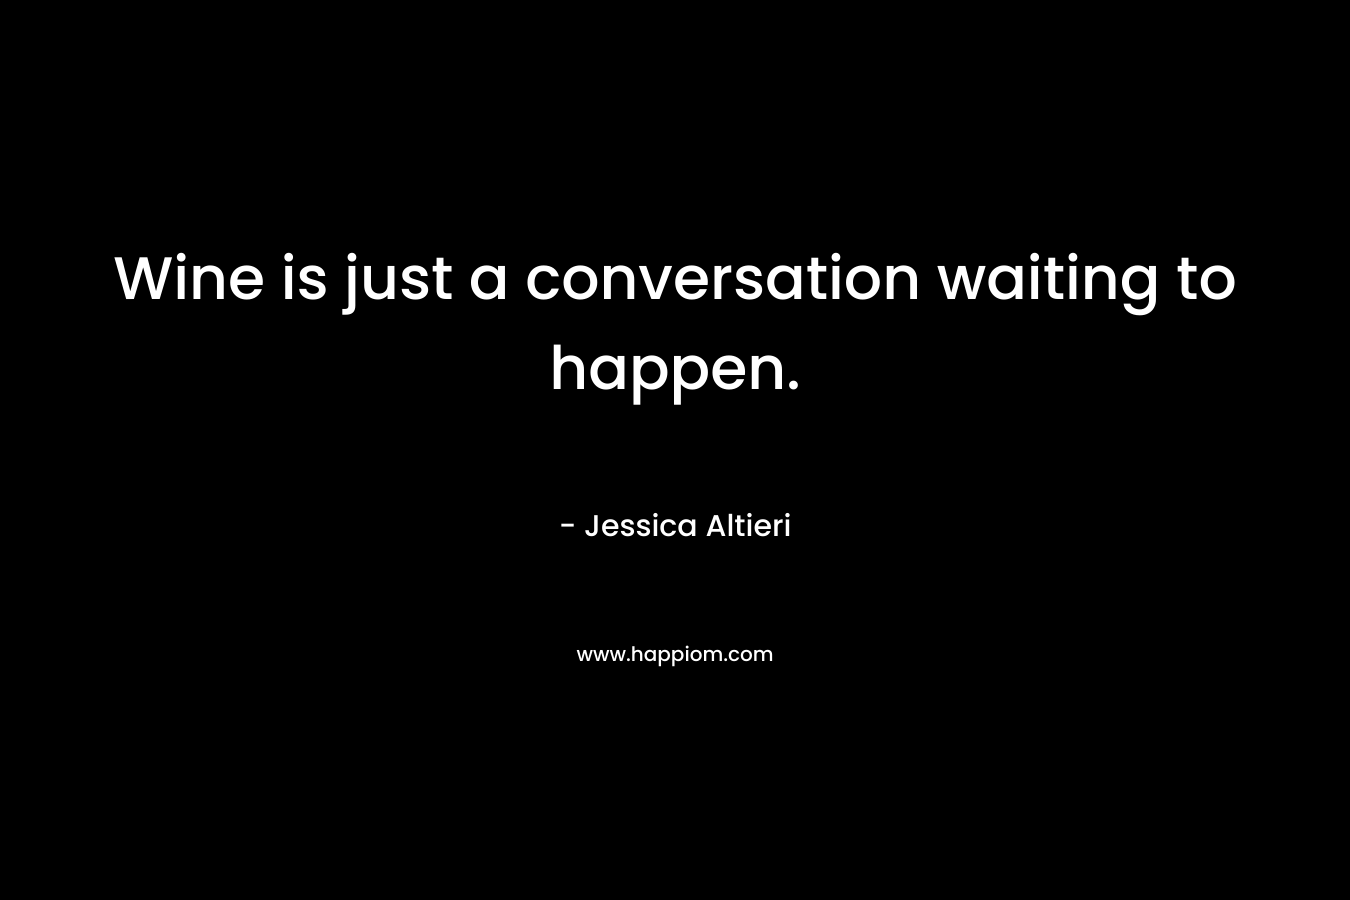 Wine is just a conversation waiting to happen. – Jessica Altieri